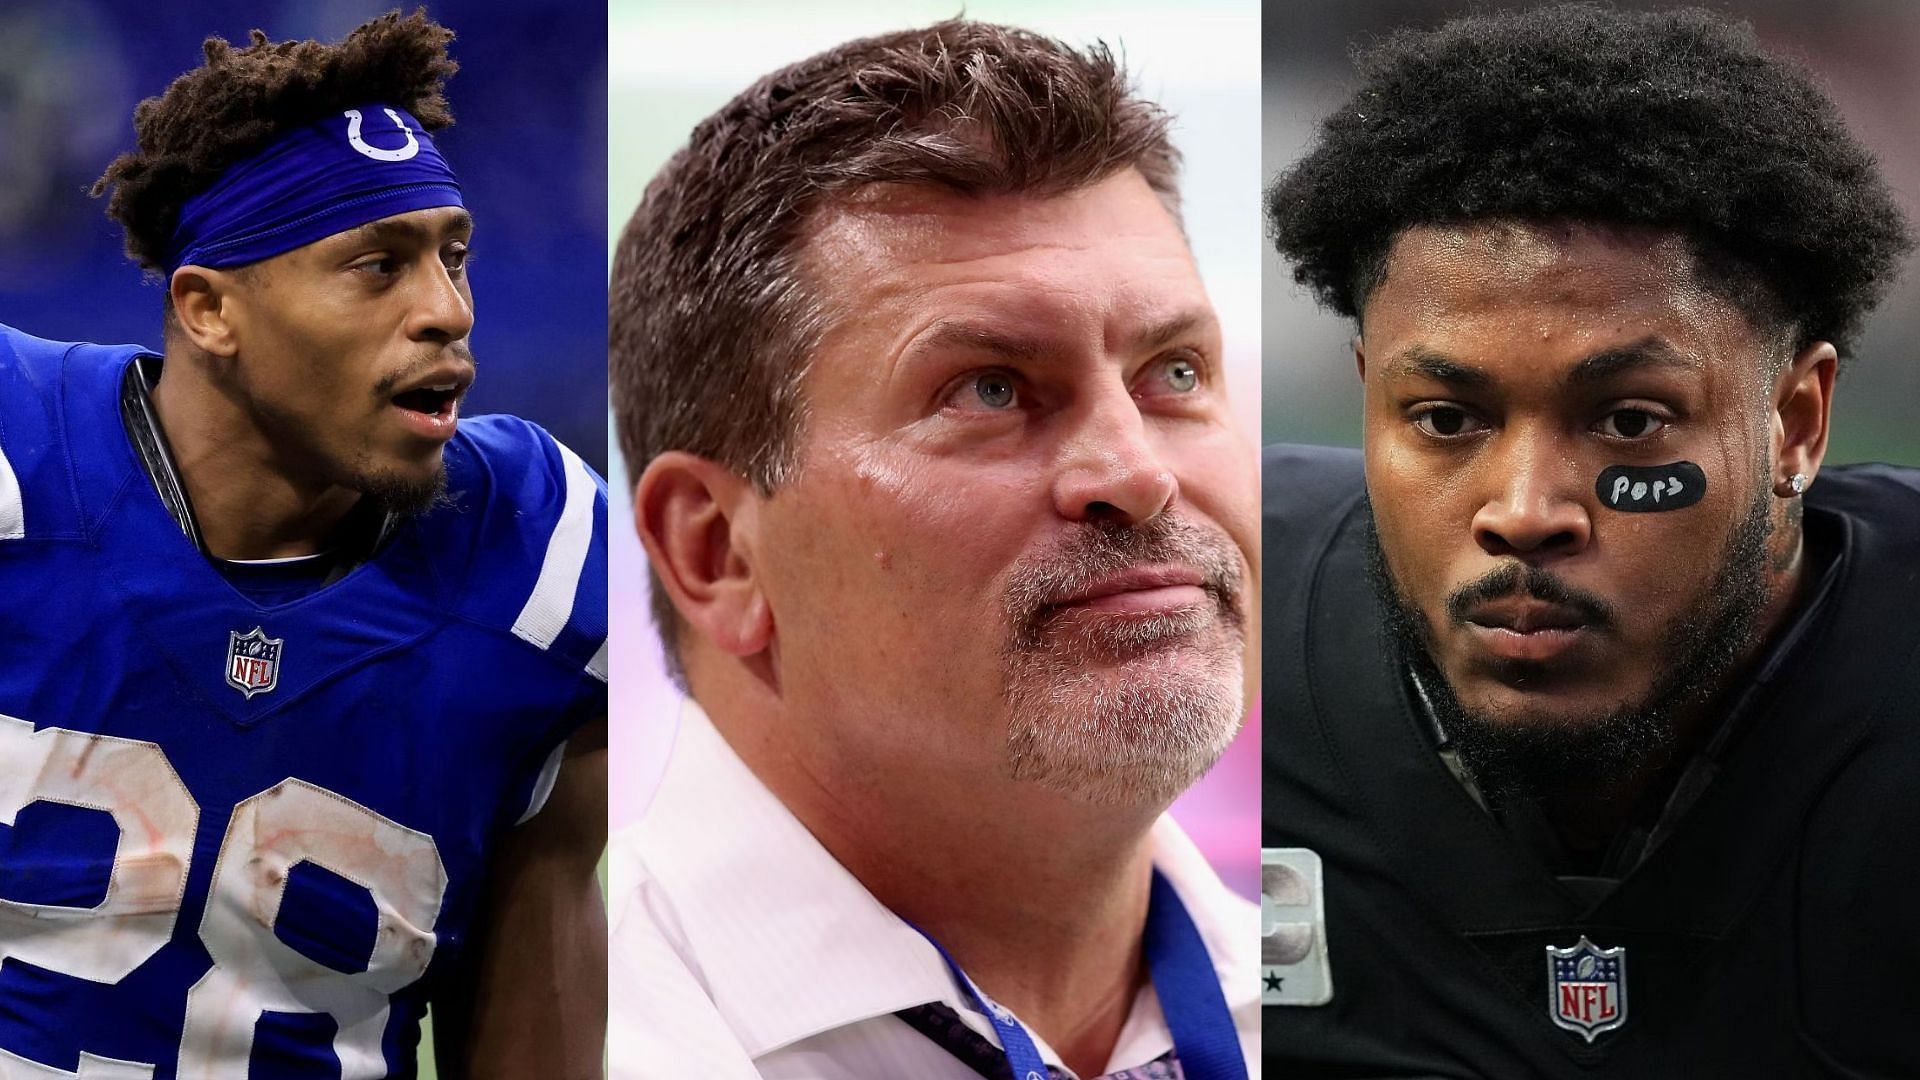 Former NFL offensive lineman Mark Schlereth told the likes of Jonathan Taylor and Josh Jacobs to quit complaining about what